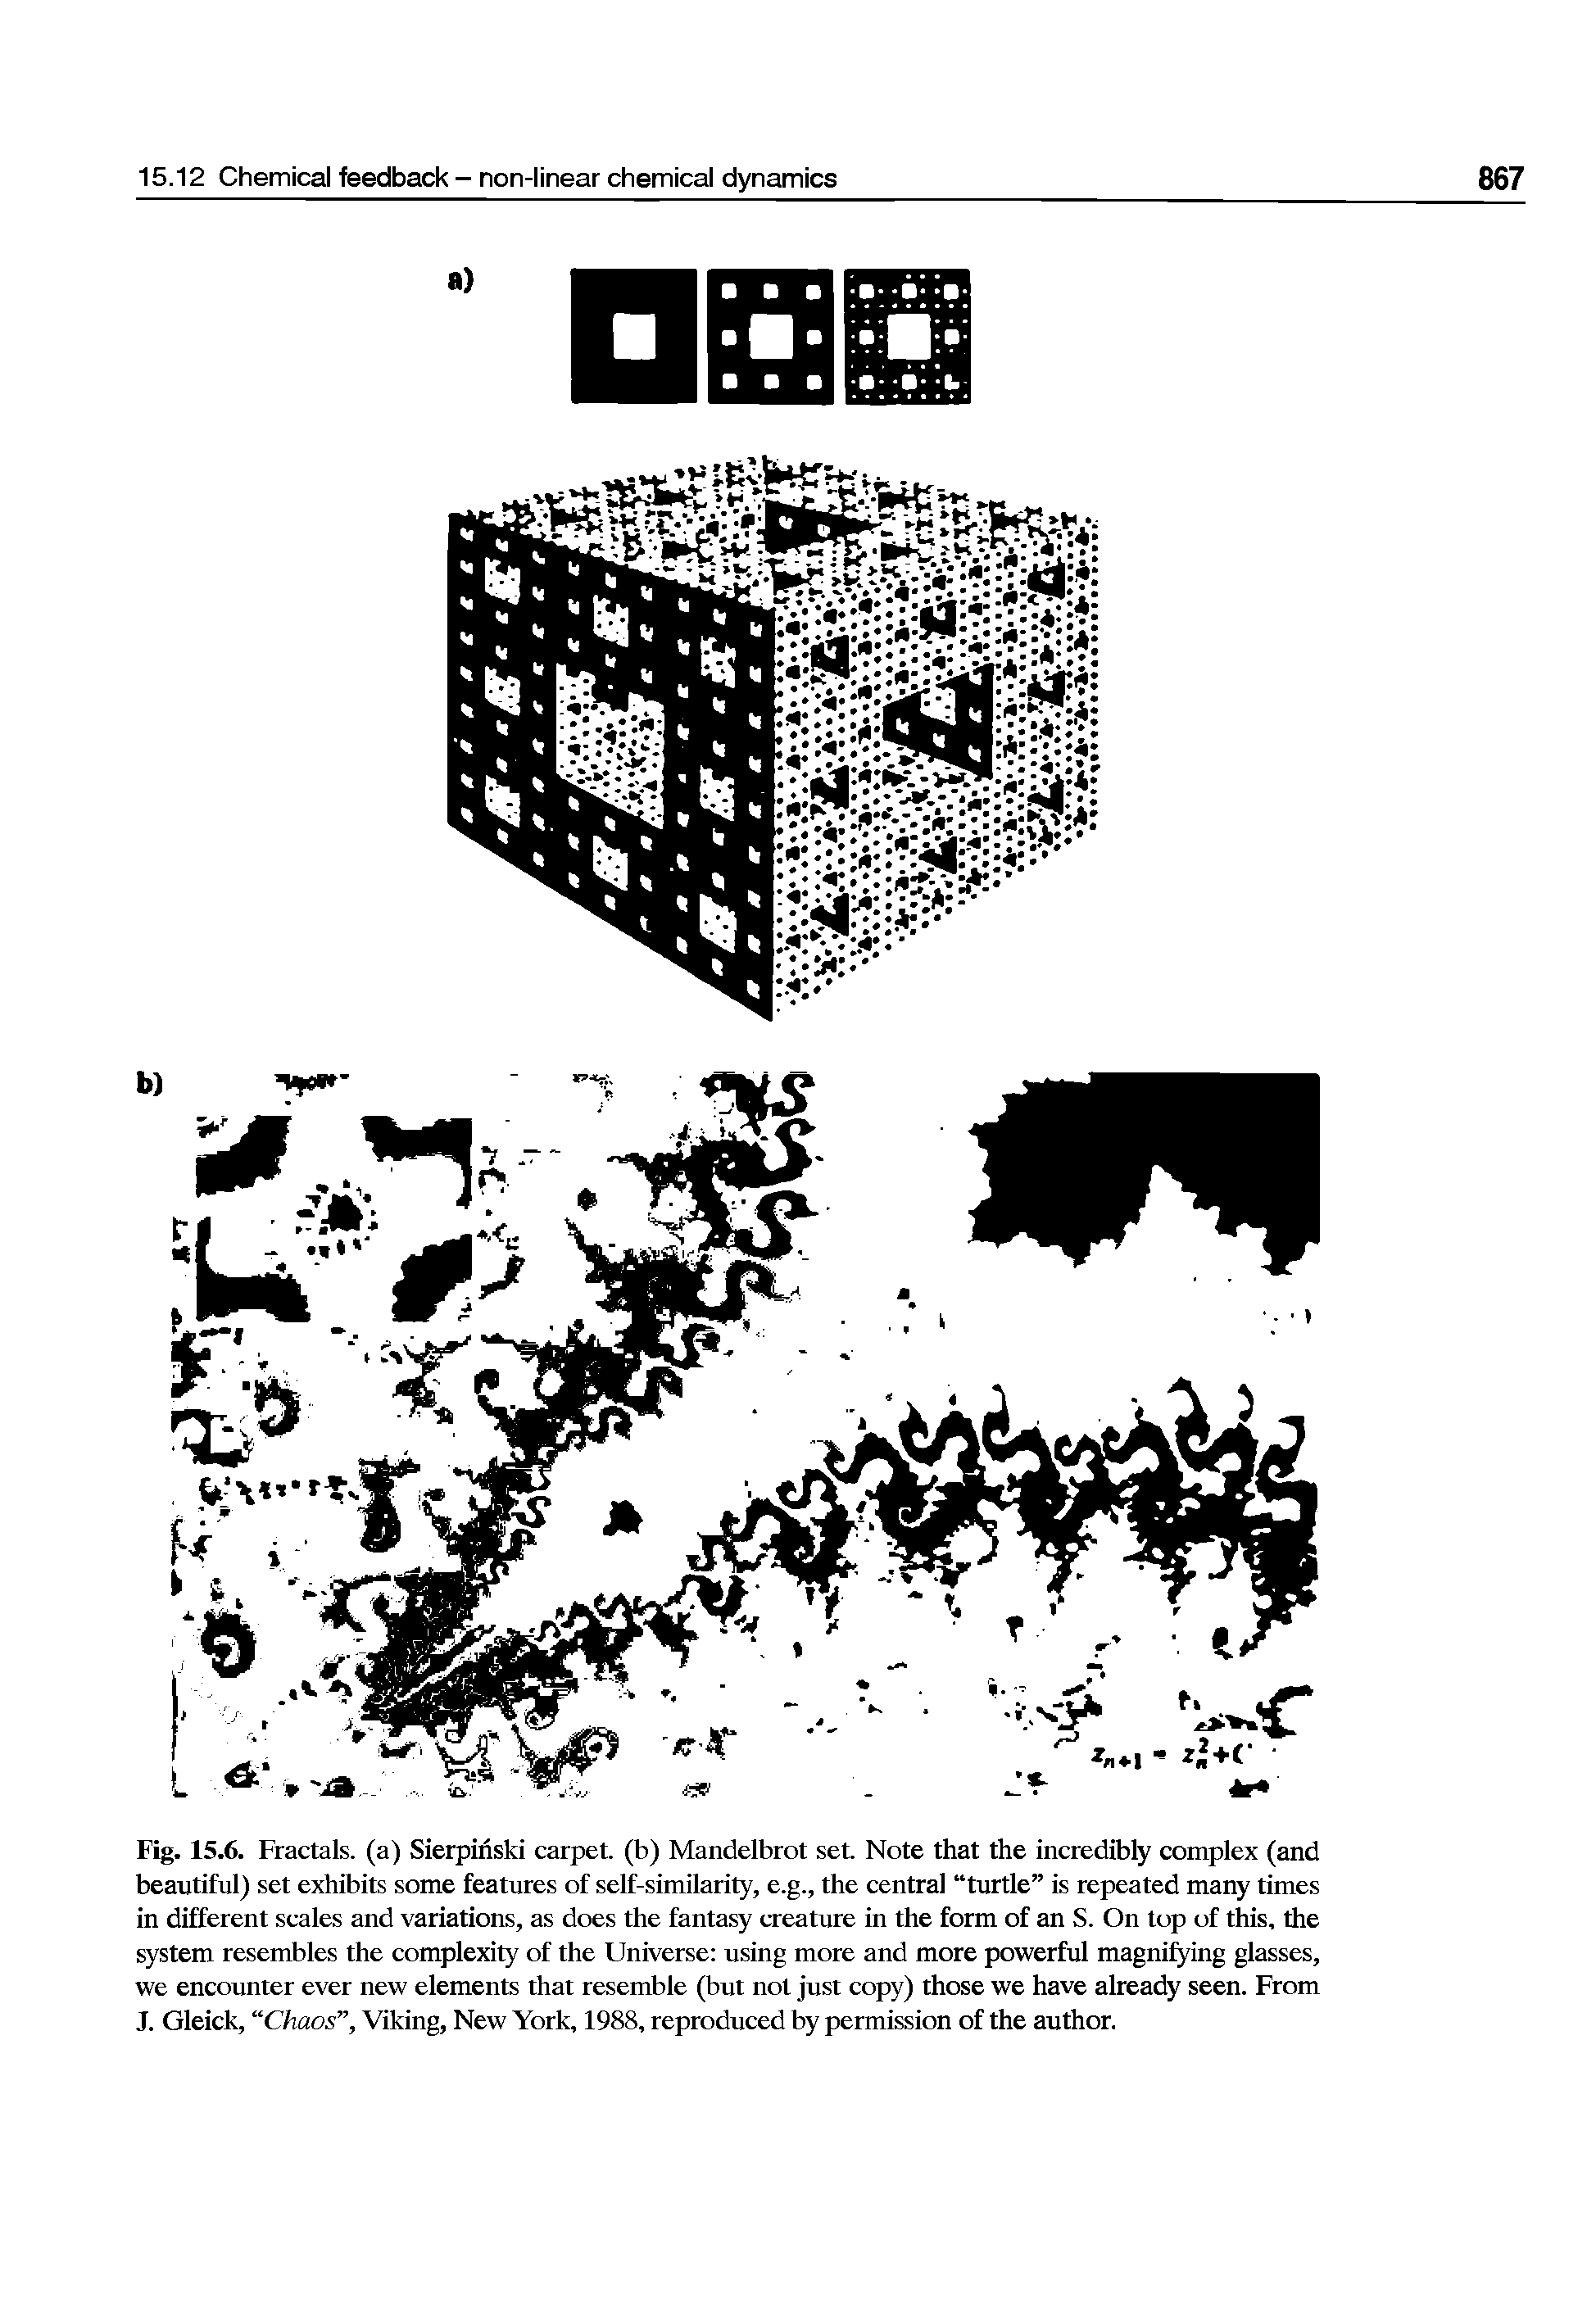 Fig. 15.6. Fractals, (a) SierpMski carpet, (b) Mandelbrot set. Note that the incredibly complex (and beautiful) set exhibits some features of self-similarity, e.g., the central turtle is repeated many times in different scales and variations, as does the fantasy creature in the form of an S. On top of this, the system resembles the complexity of the Universe using more and more powerful magnifying glasses, we encounter ever new elements that resemble (but not just copy) those we have already seen. From J. Gleick, Chaos , Viking, New York, 1988, reproduced by permission of the author.